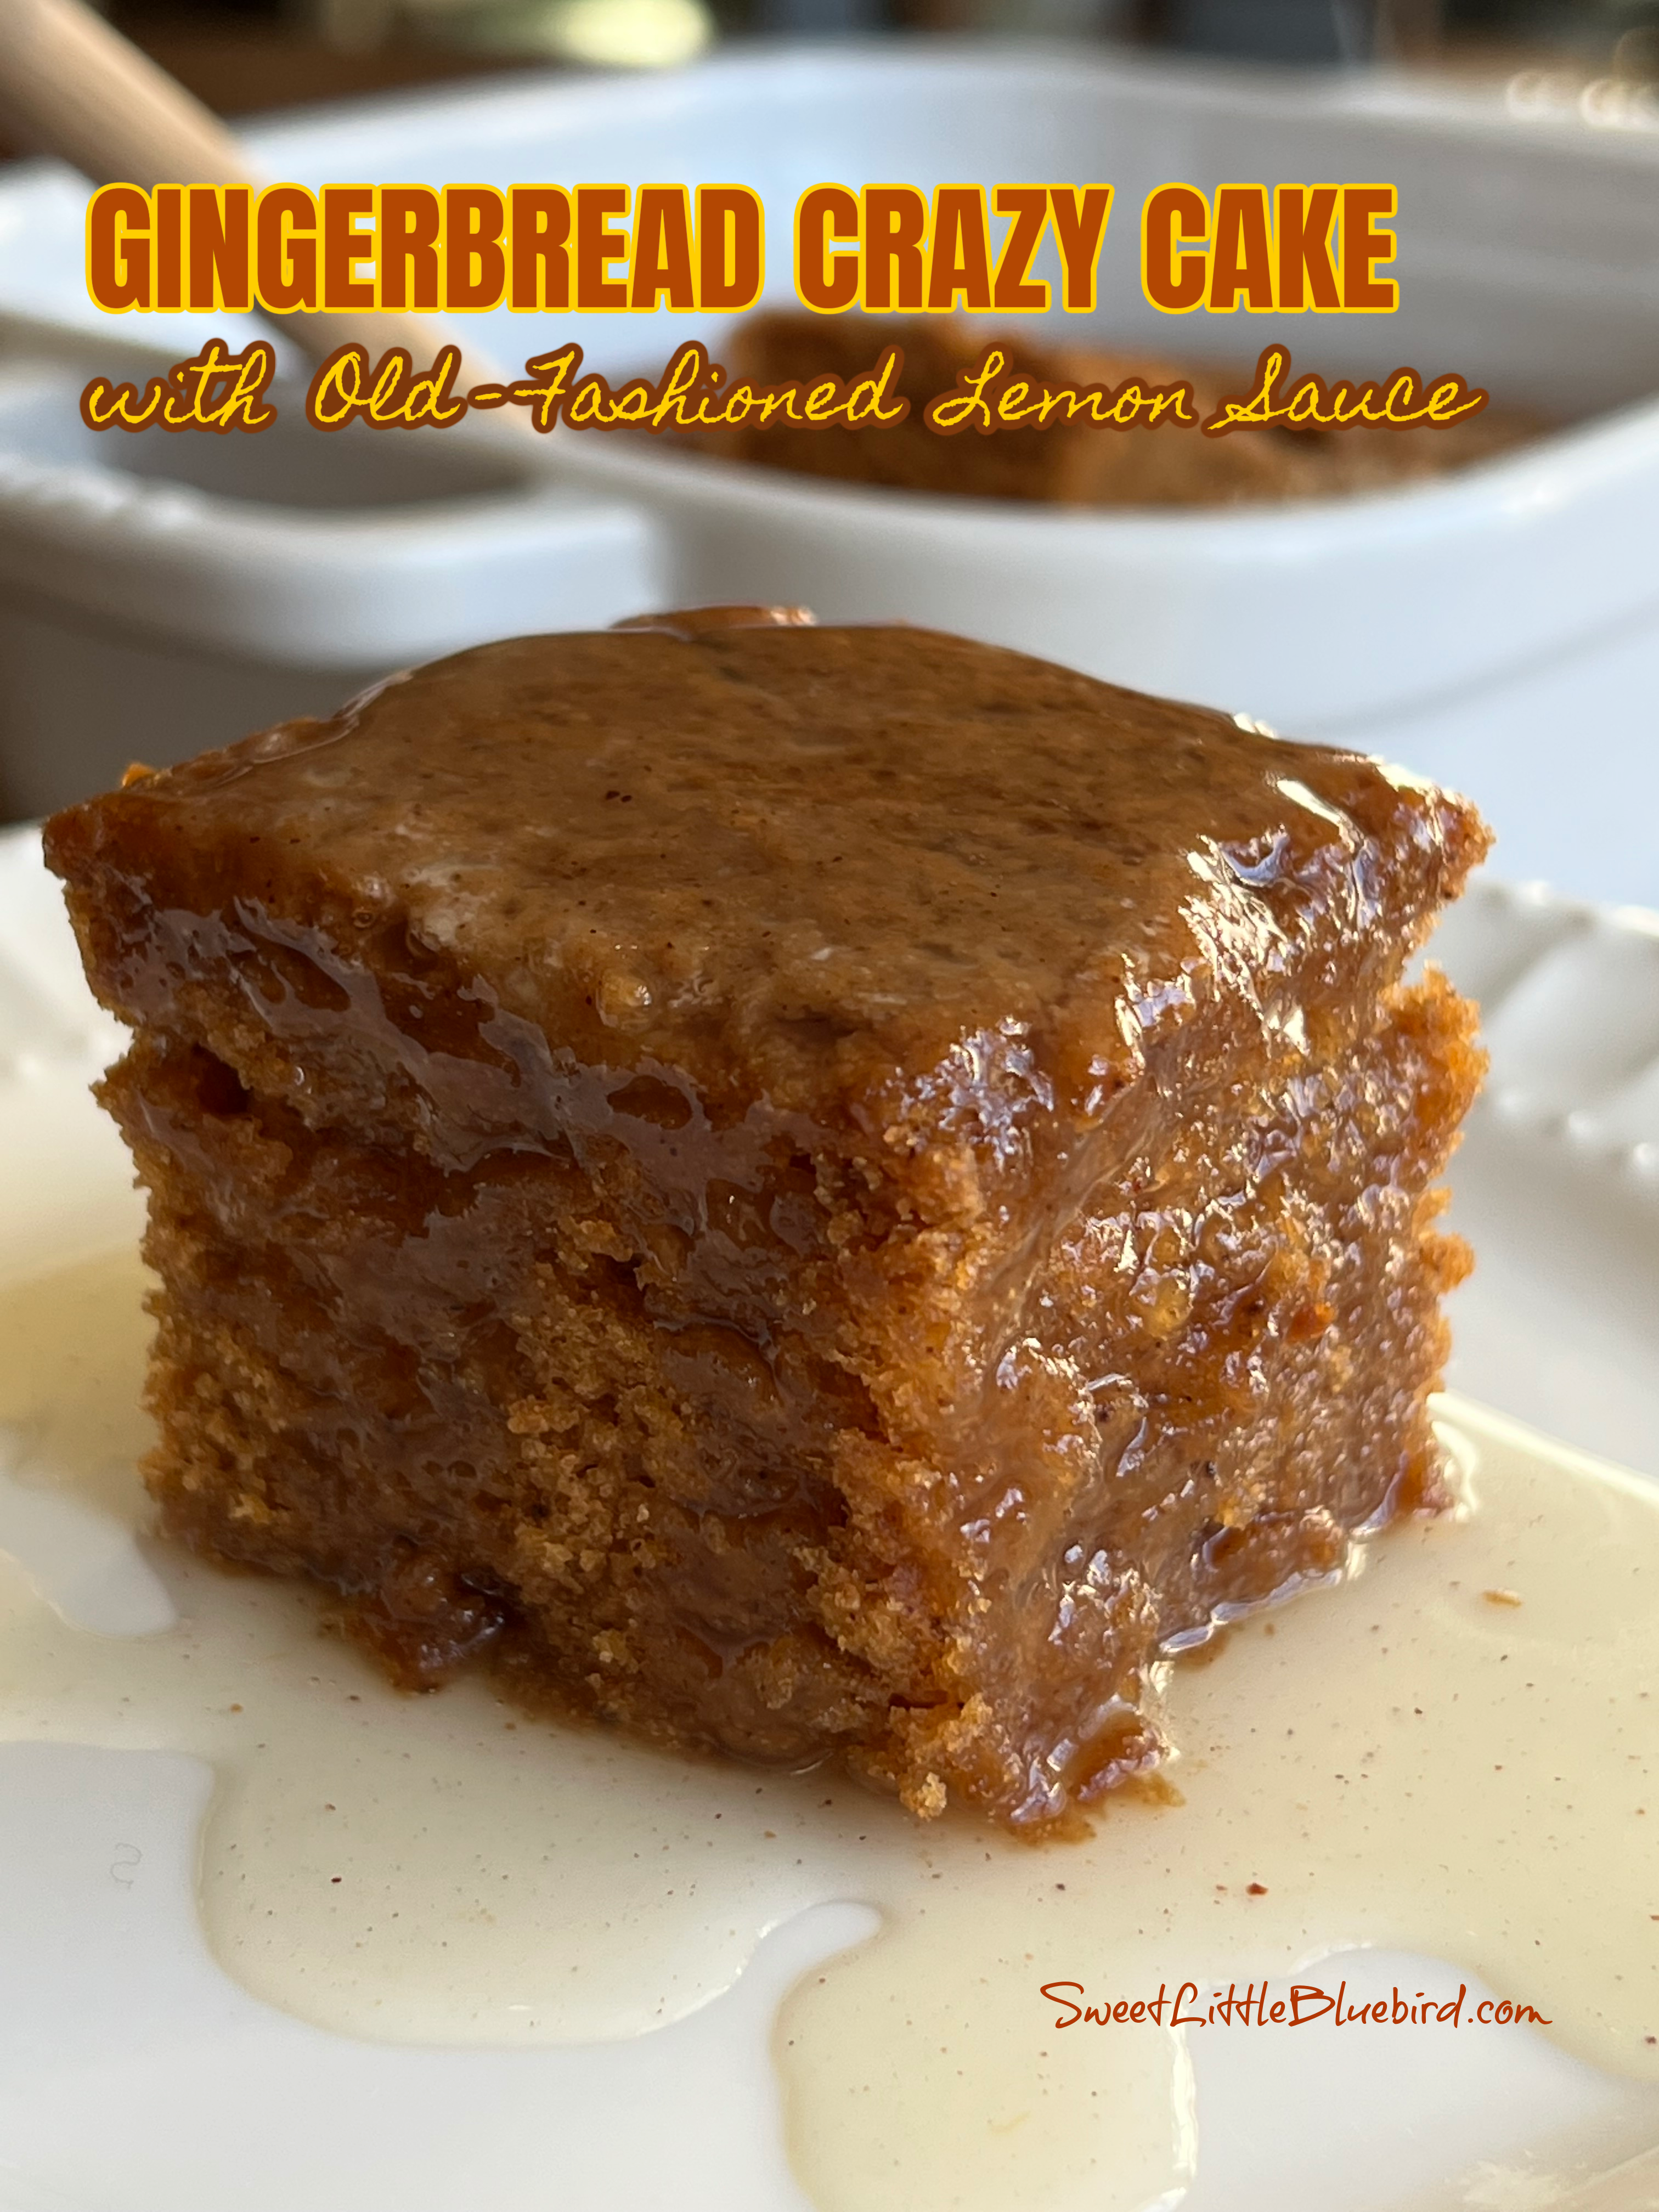 This is a photo of Gingerbread Crazy Cake topped with Old Fashioned Lemon Sauce.